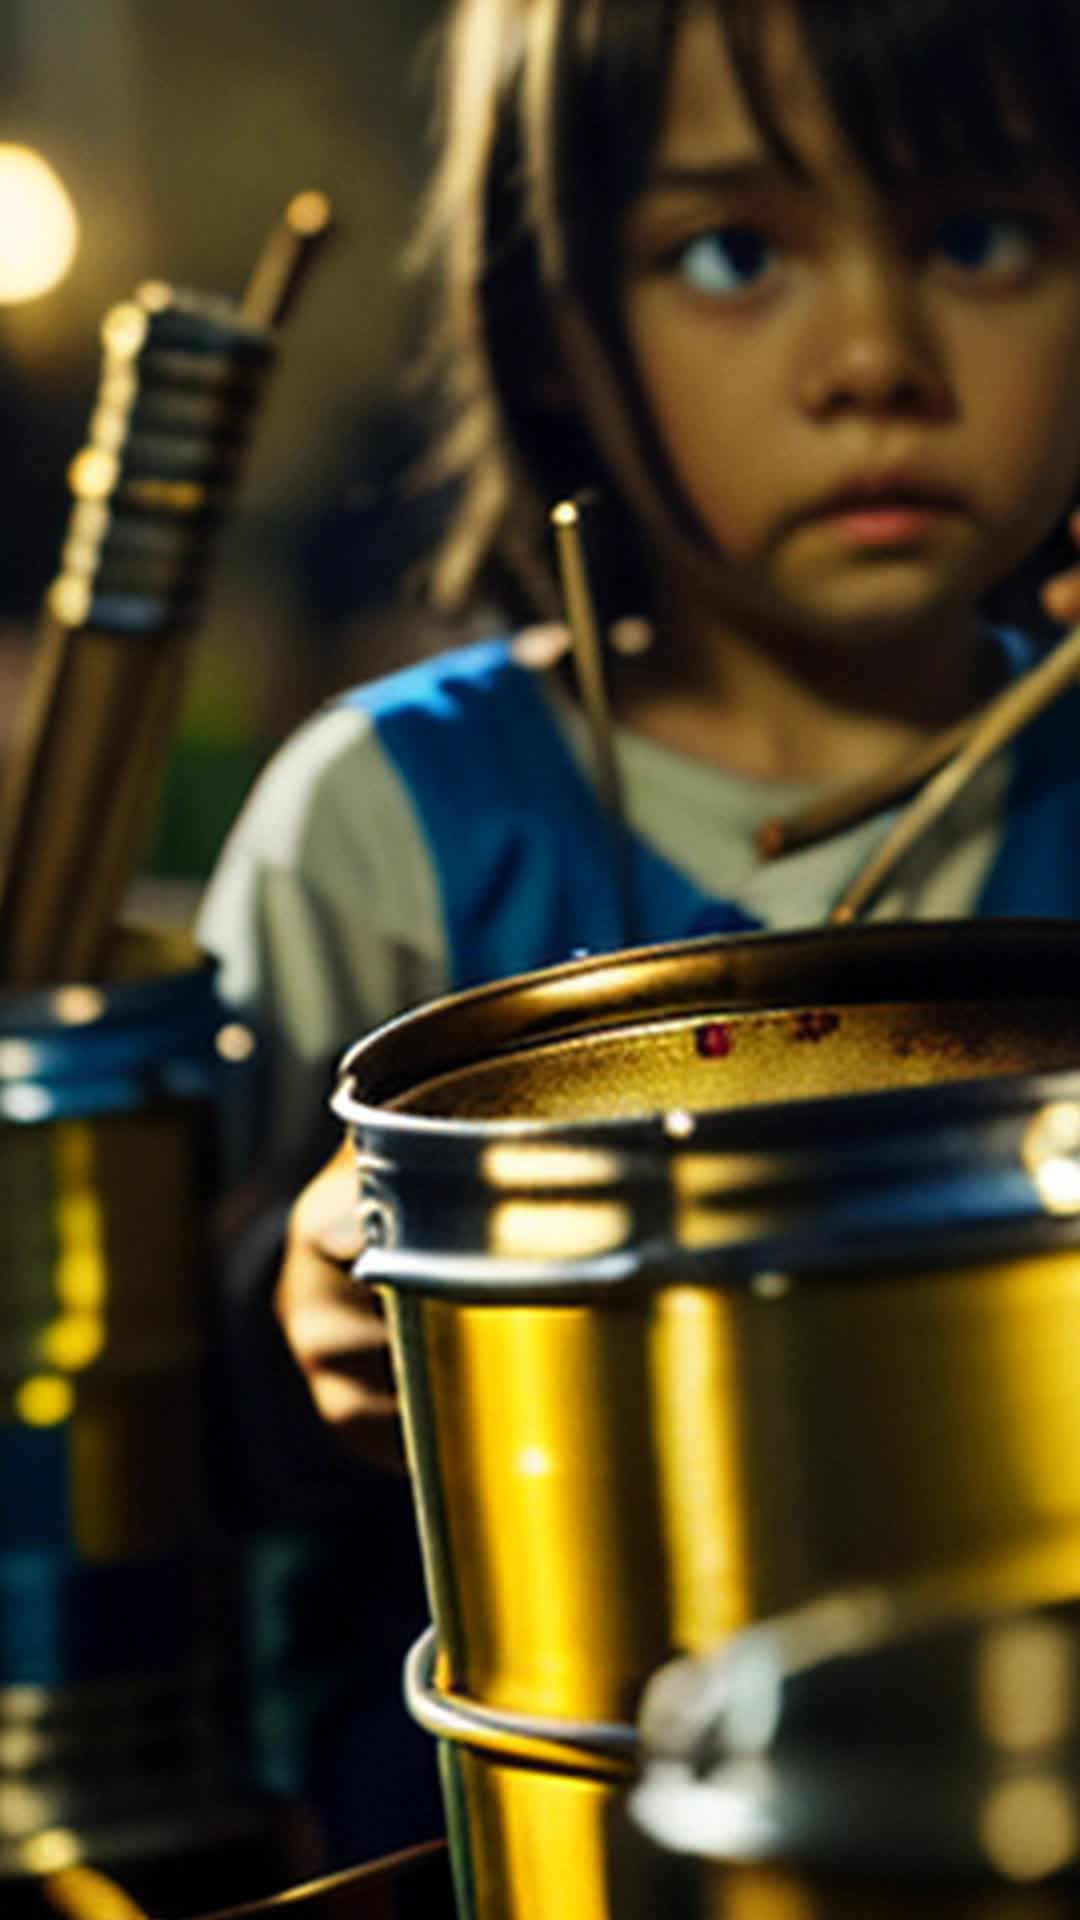 Makeshift drums and tin can flutes being tested by eager children, adjusting constructs, background filled with colorful materials, close-up, sharp focus, ambient lighting